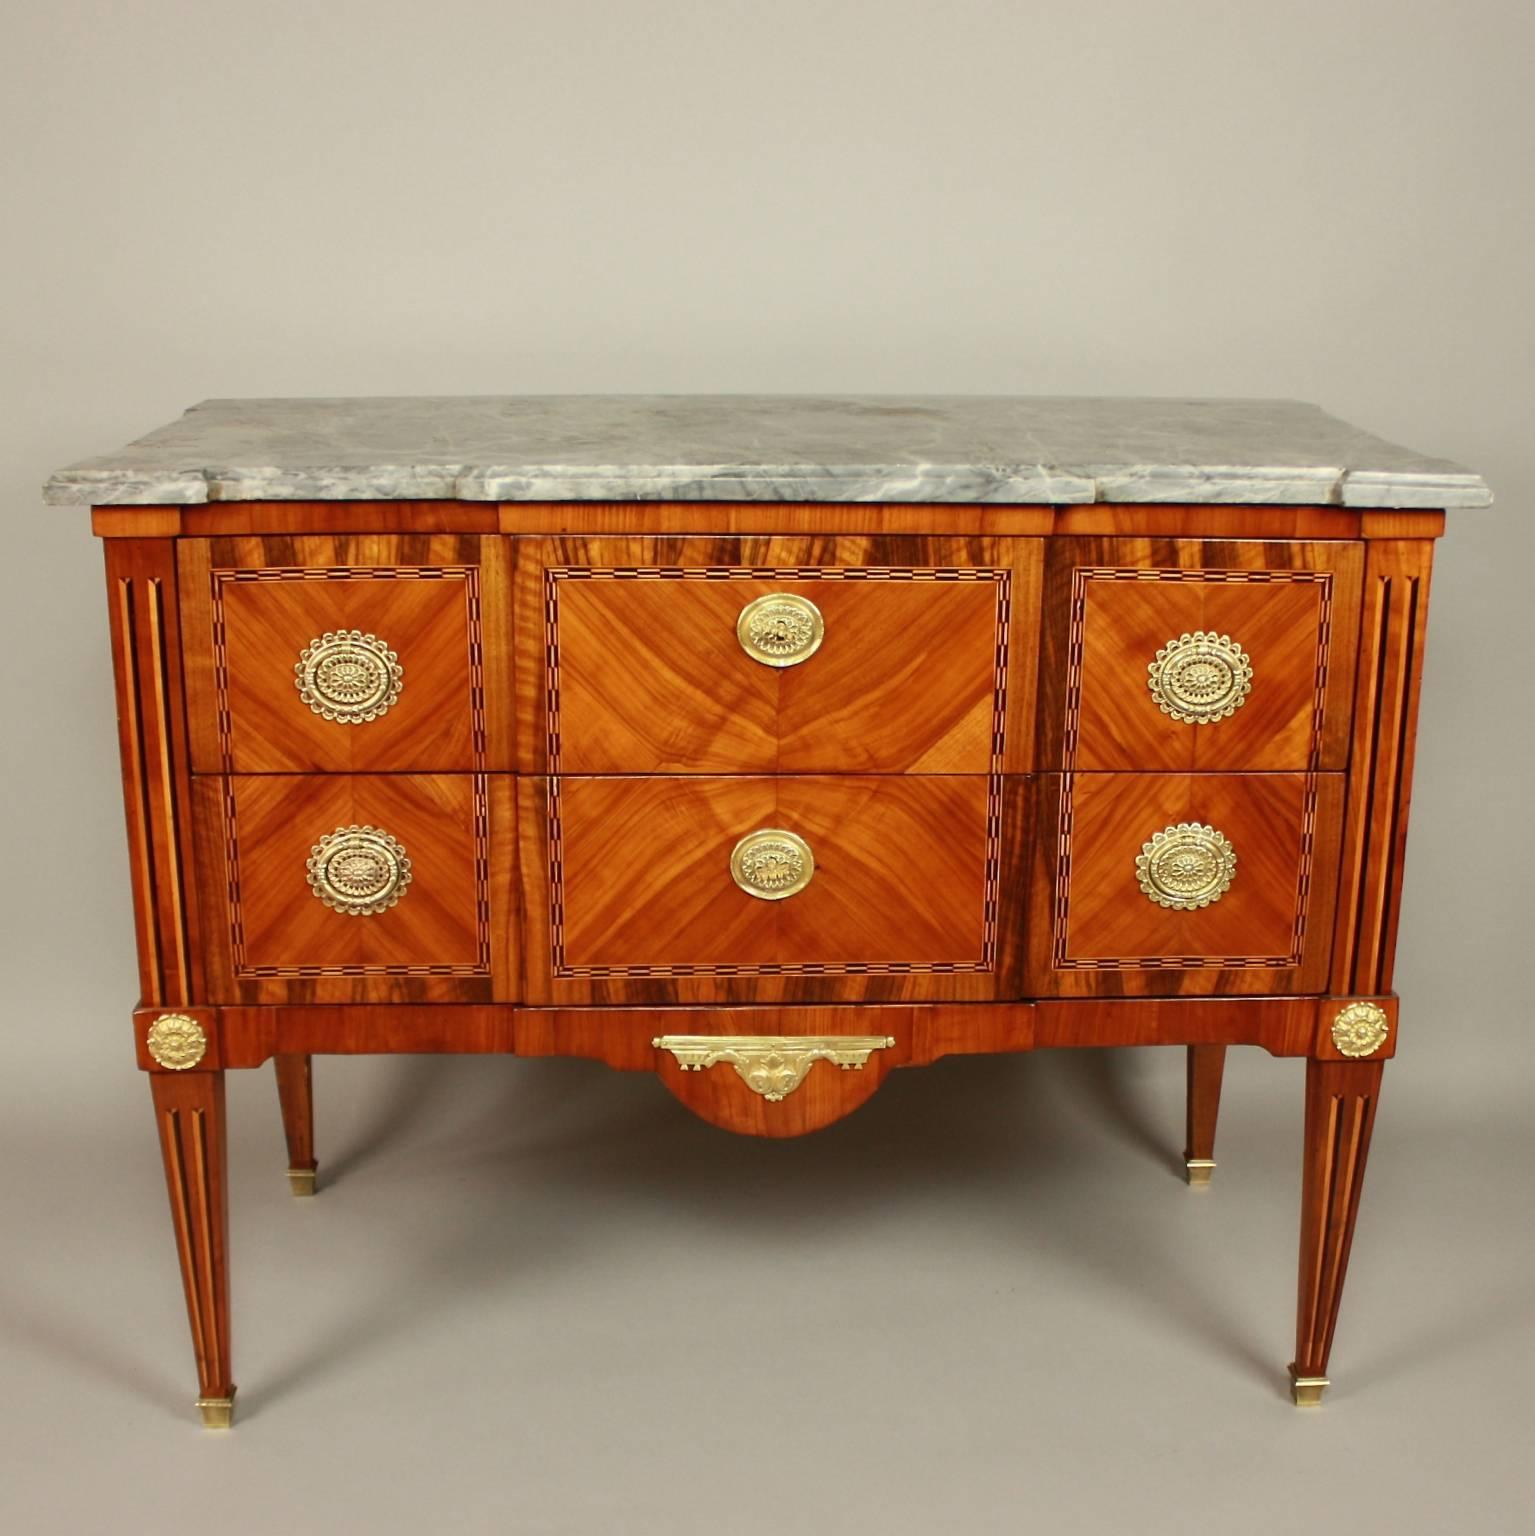 18th century French Louis XVI gilt-bronze mounted Geometrical Marquetry commode

A Louis XVI gilt-bronze mounted geometrical marquetry commode or chest of drawers with a shaped moulded mottled grey marble top above two long drawers of break-front